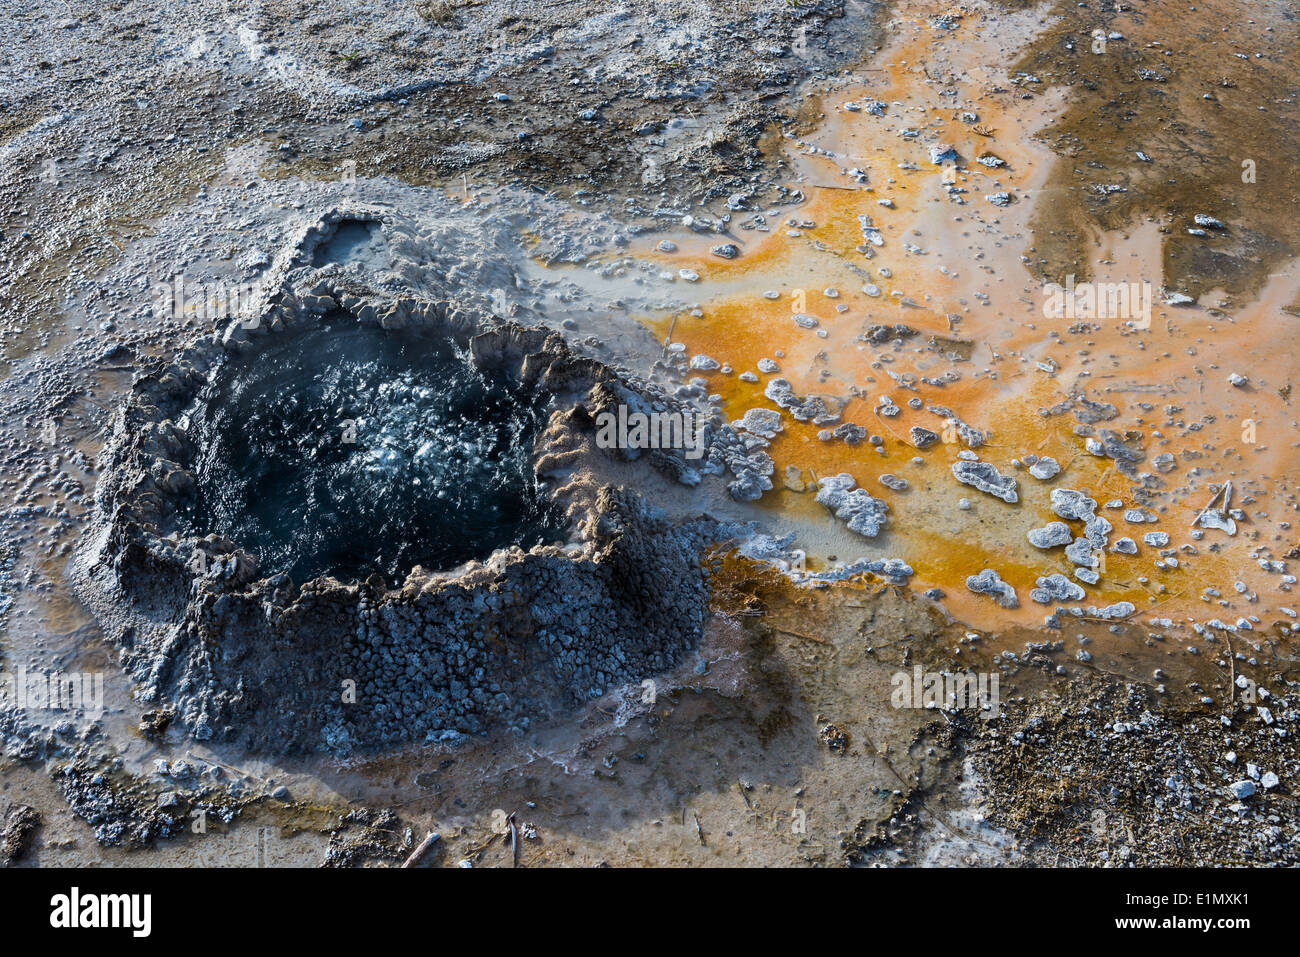 Hot spring with bubbling water. Yellowstone National Park, Wyoming, USA. Stock Photo